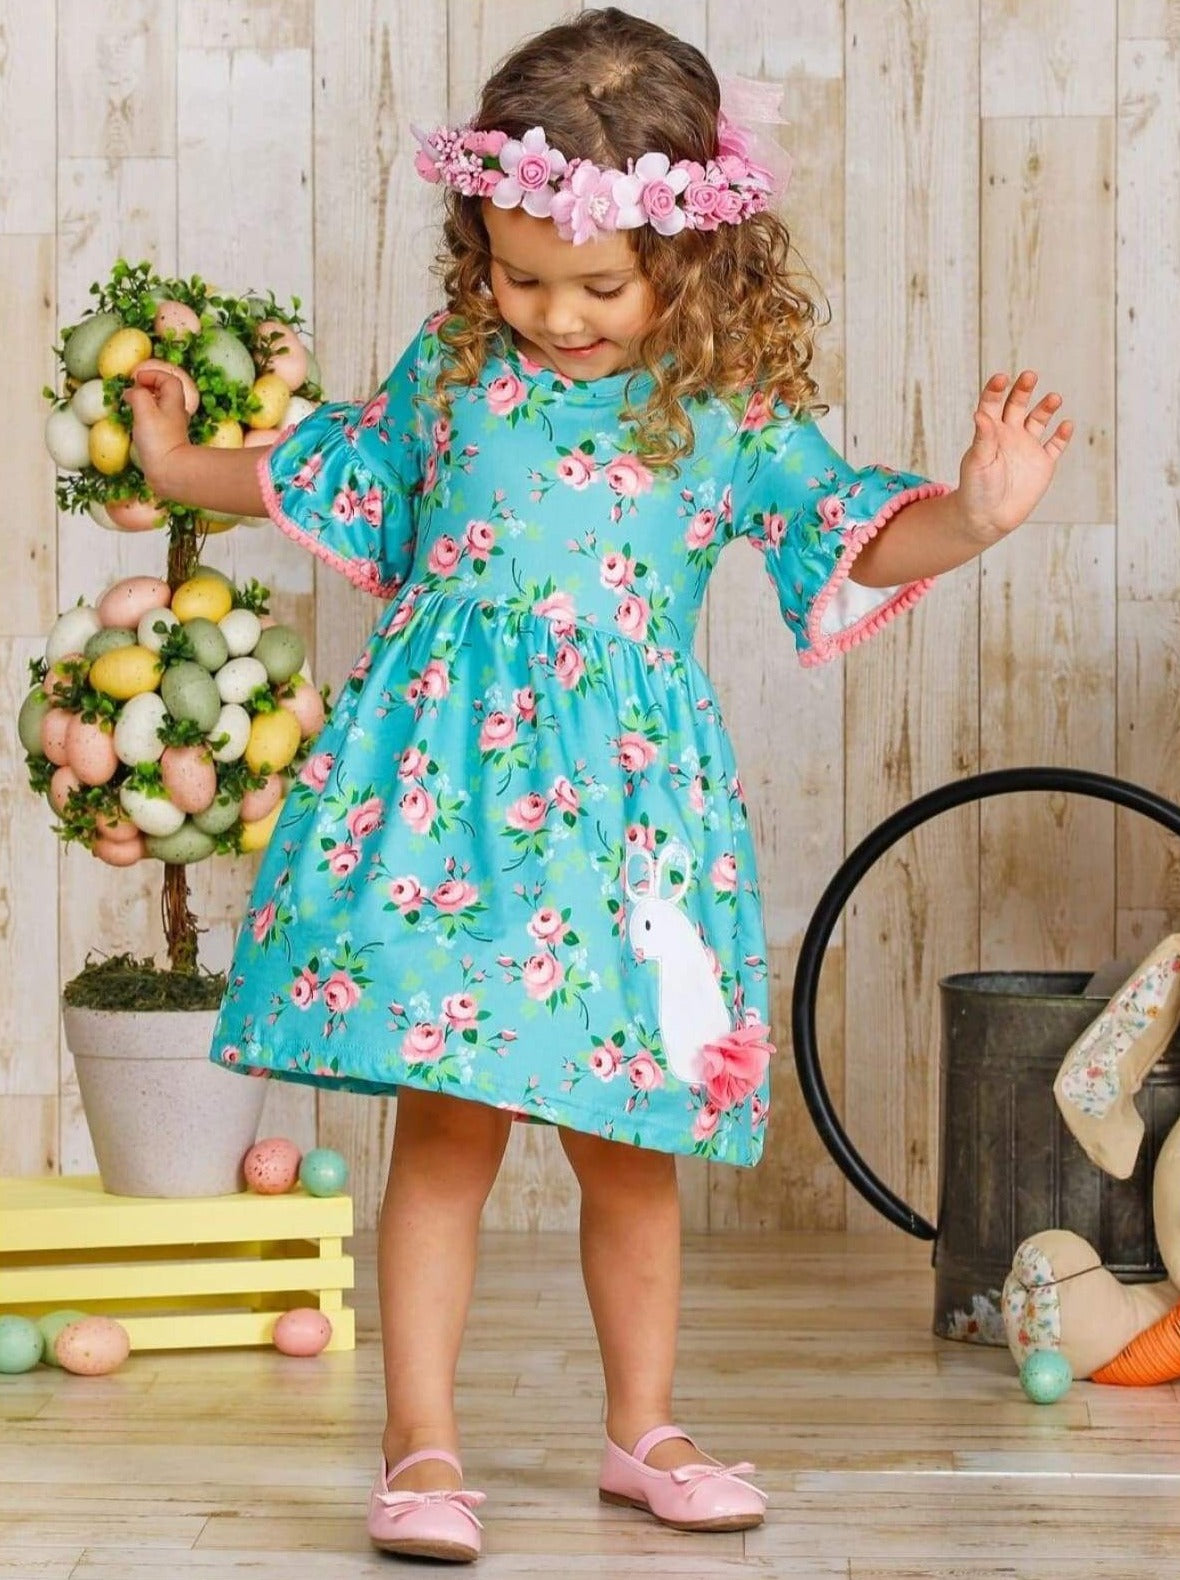 Dress features a floral print, pom-pom trim ruffle sleeves, and a bunny tail applique- Girls Spring Casual Dress 2T/8Y